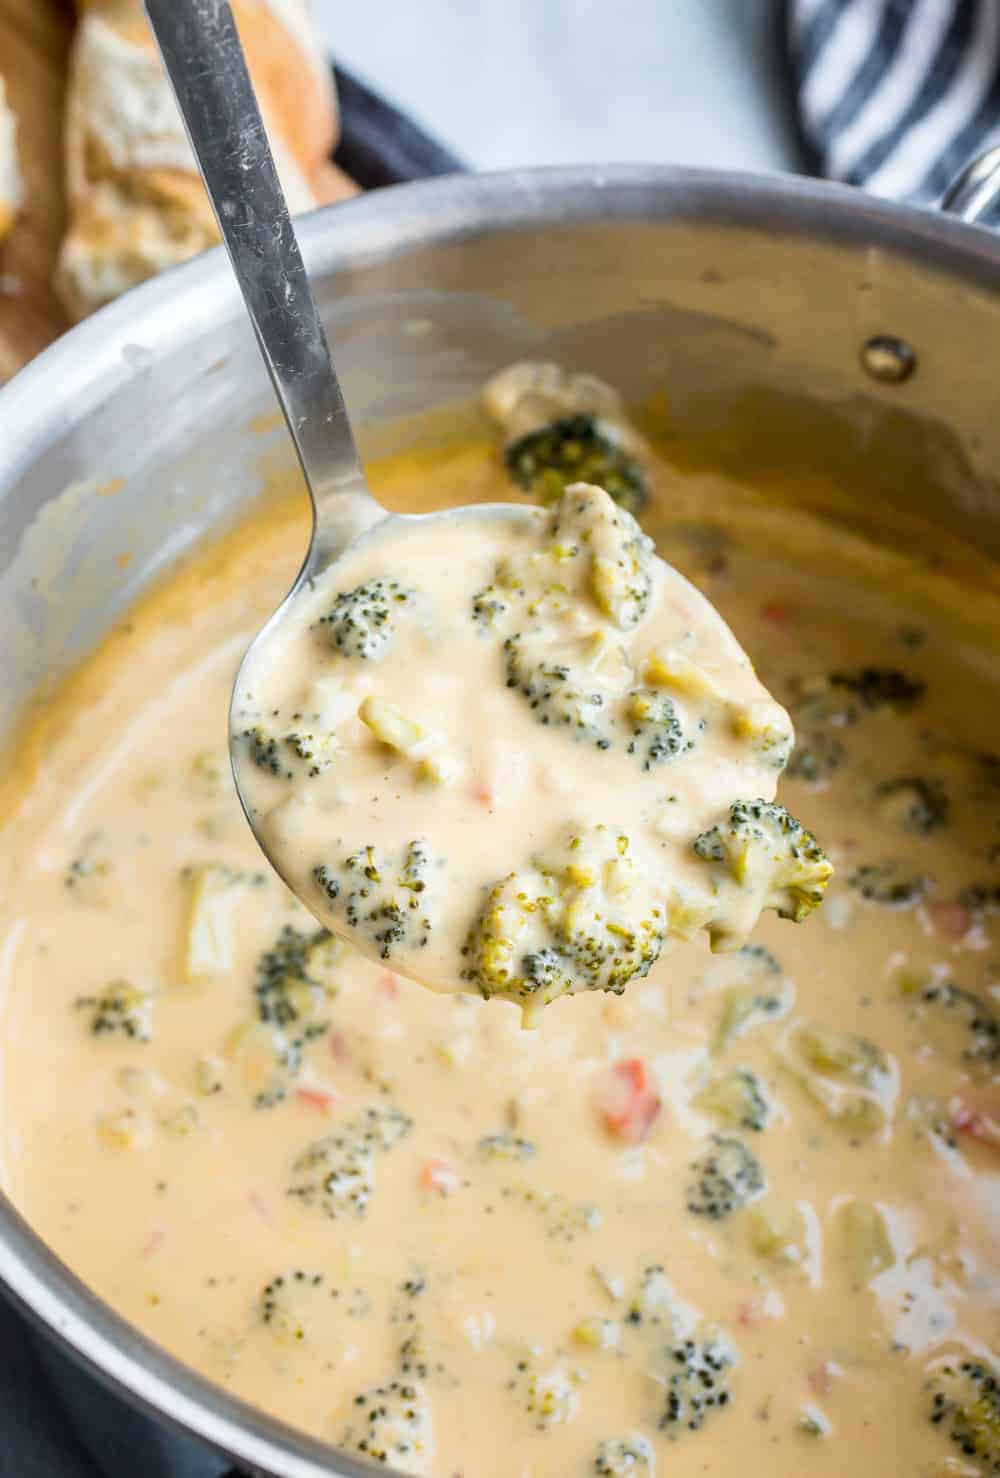 Ladle of broccoli cheese soup over a pot of soup